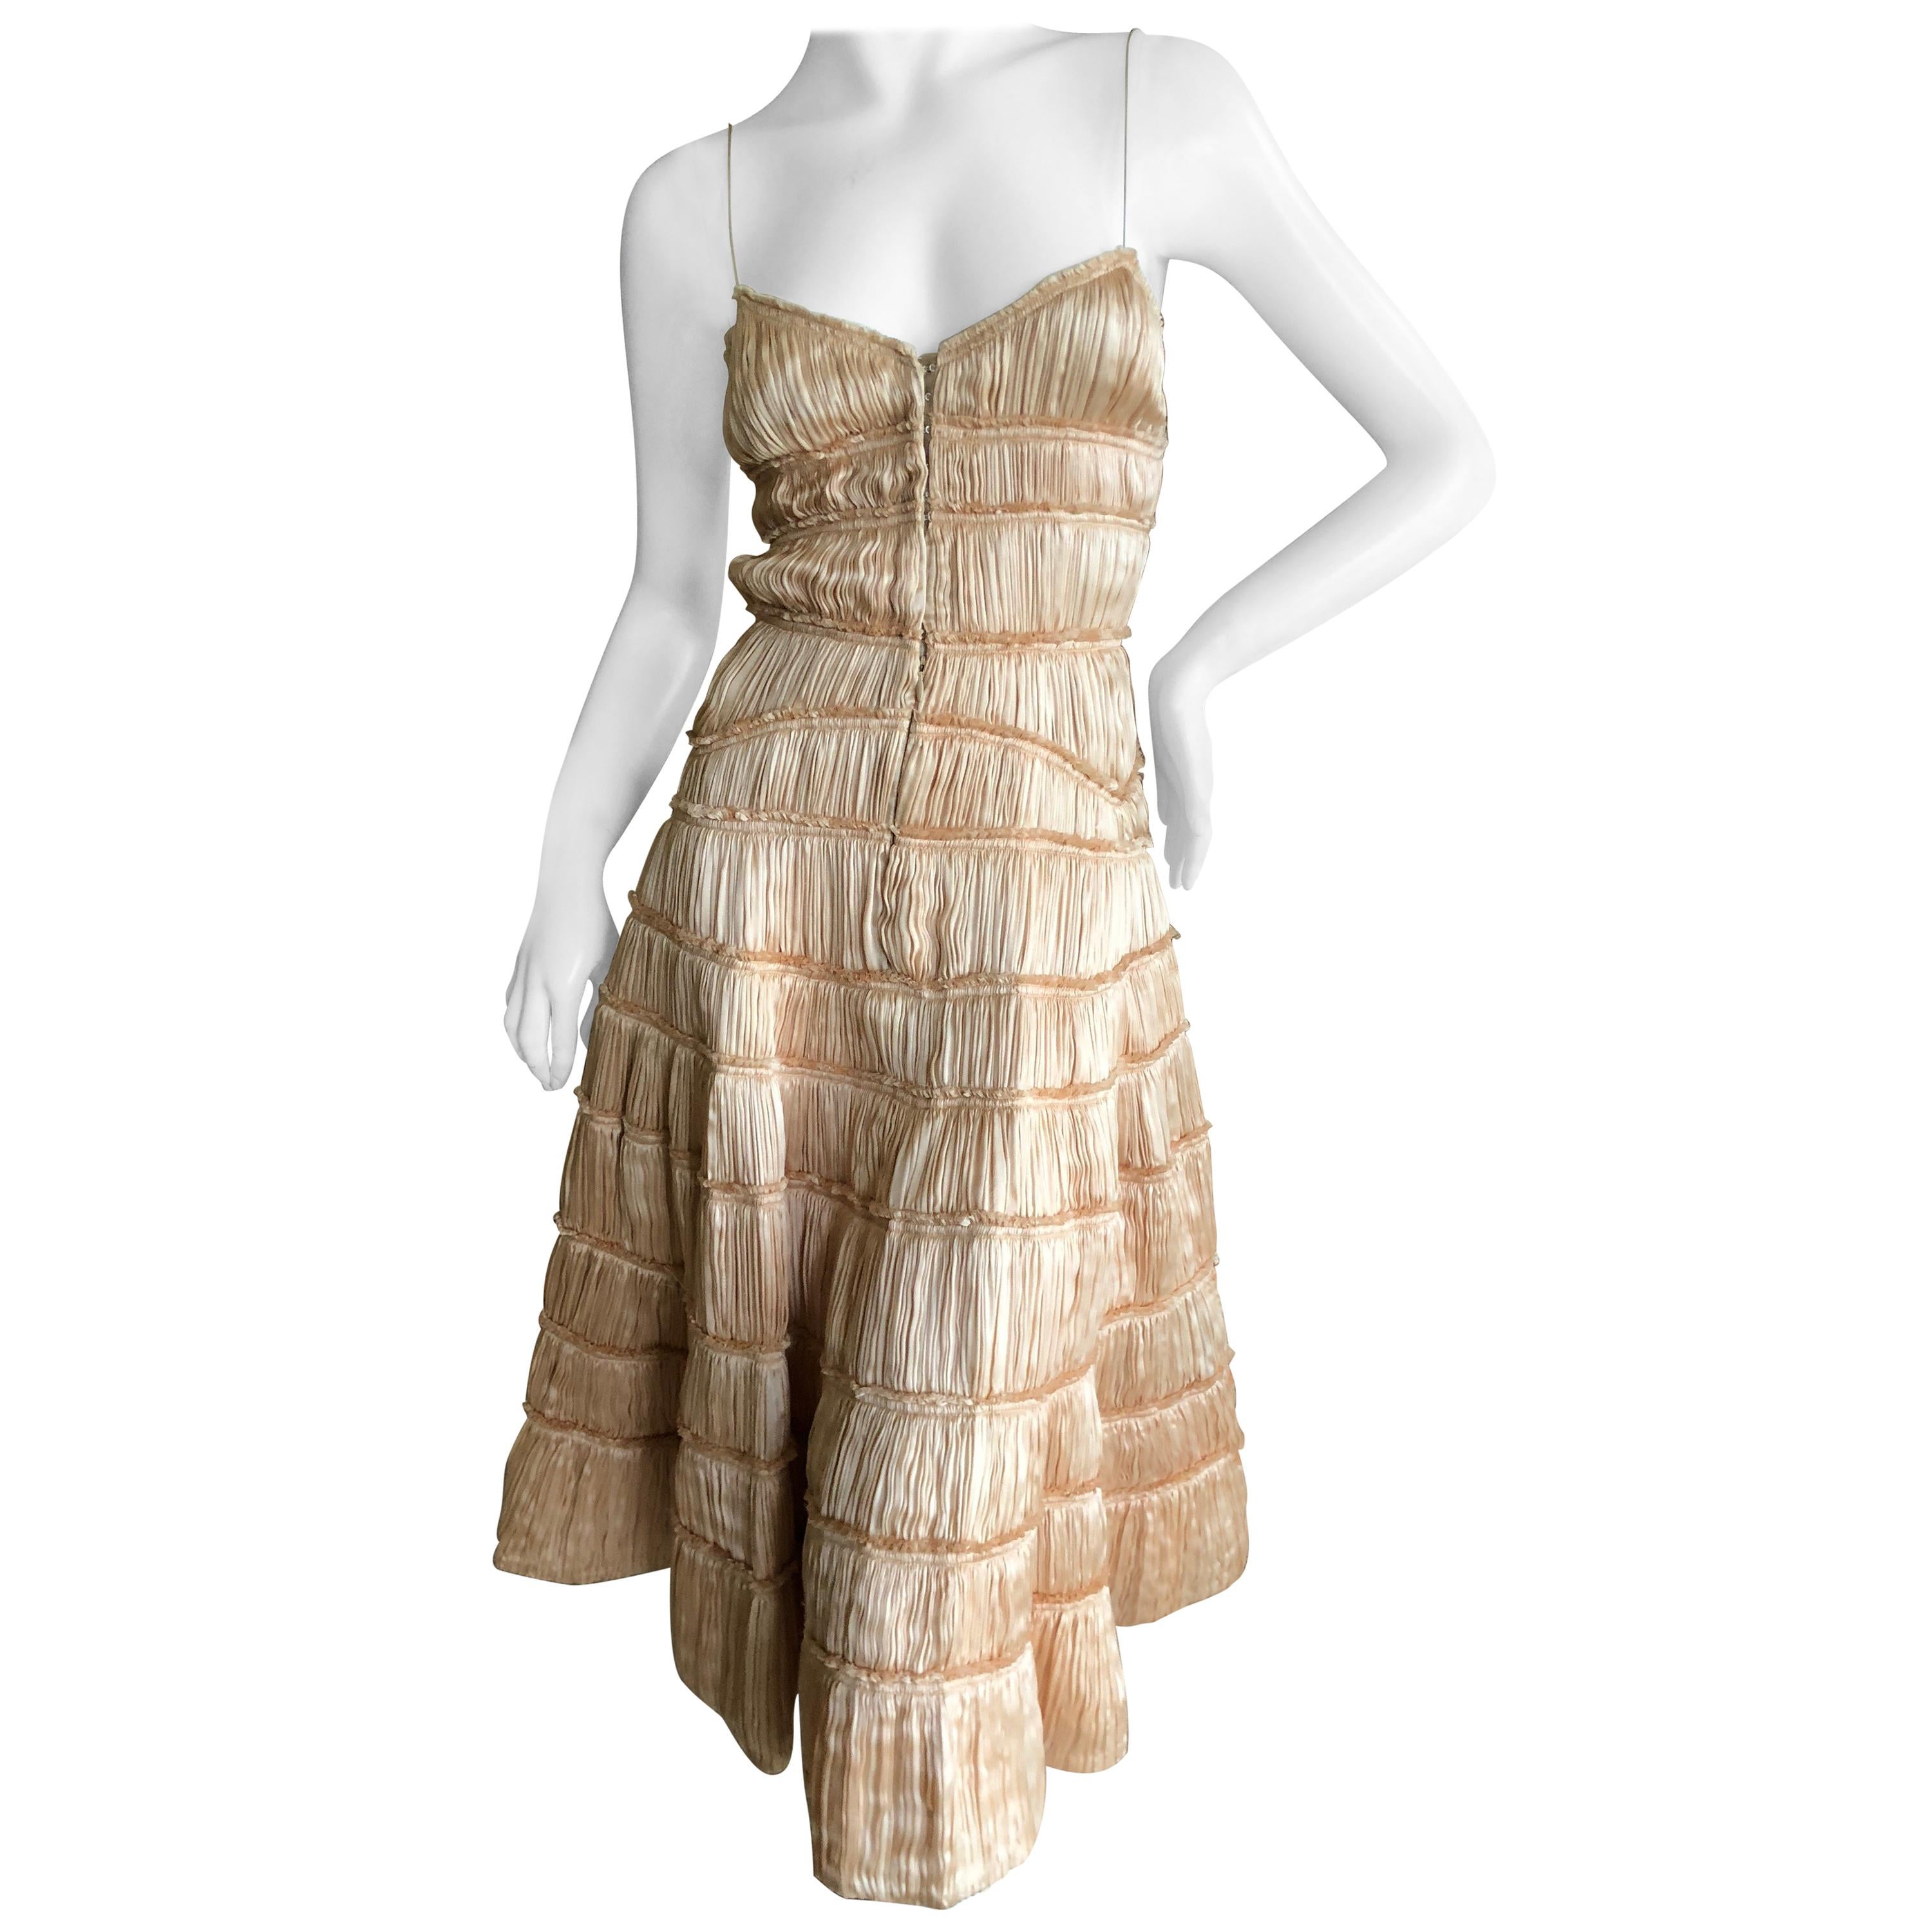 Isabel Toldedo Plisse Pleated Silk Cocktail Dress for Barney's NY NWT $3750